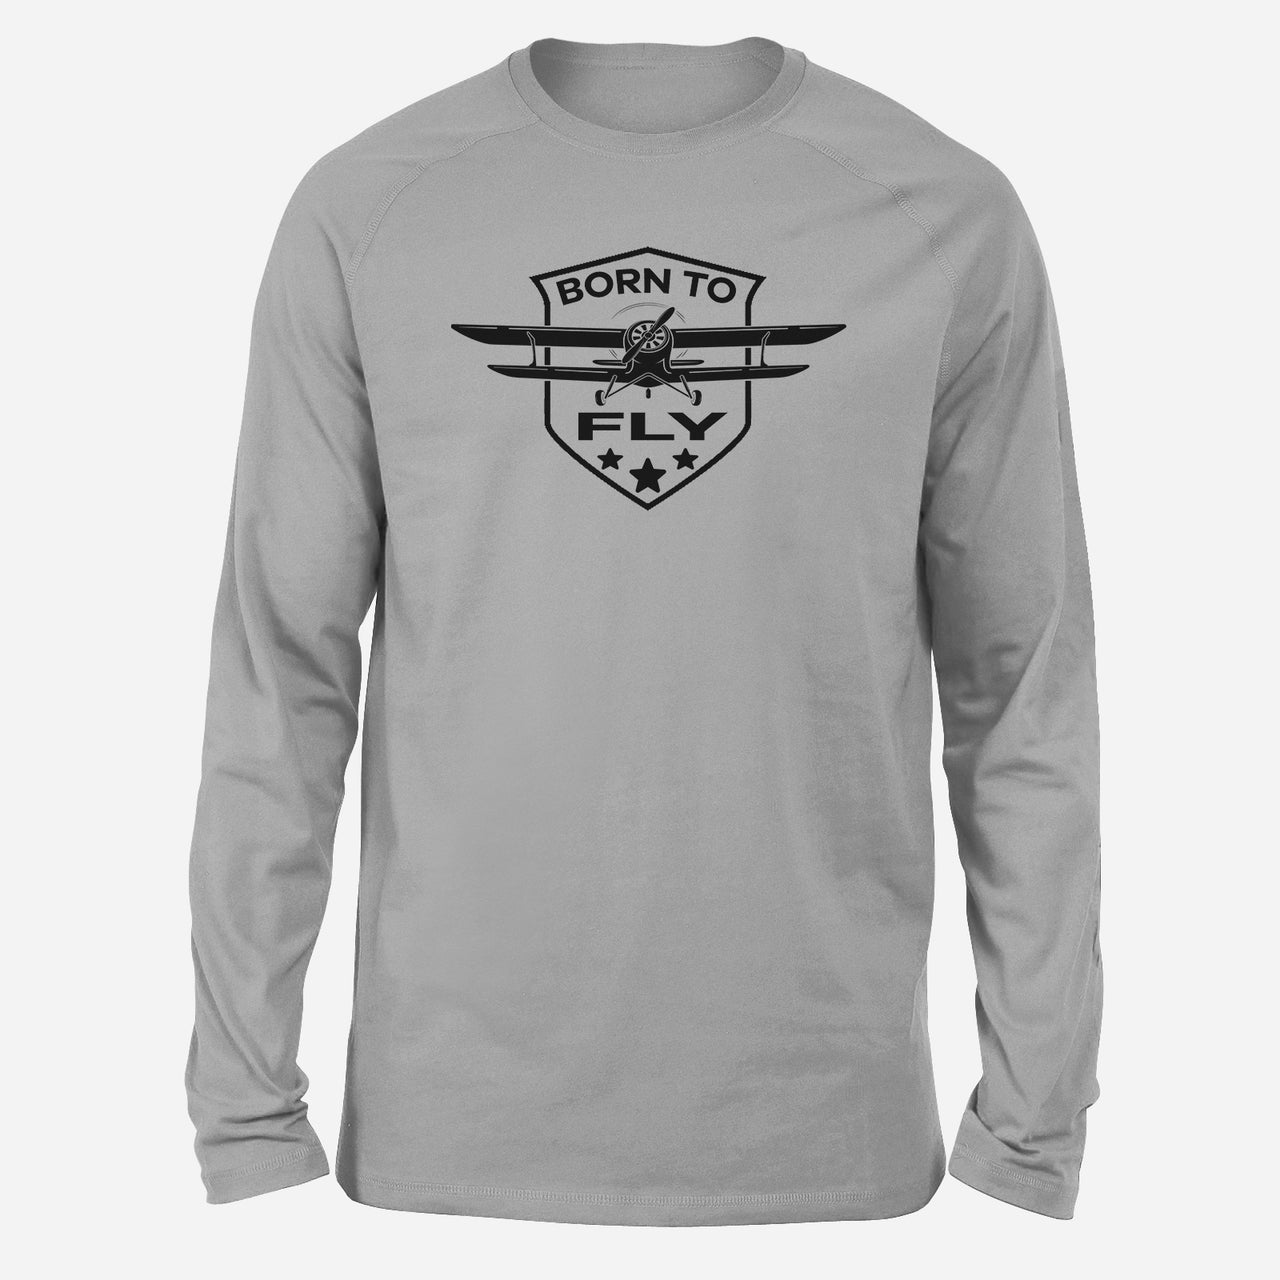 Super Born To Fly Designed Long-Sleeve T-Shirts